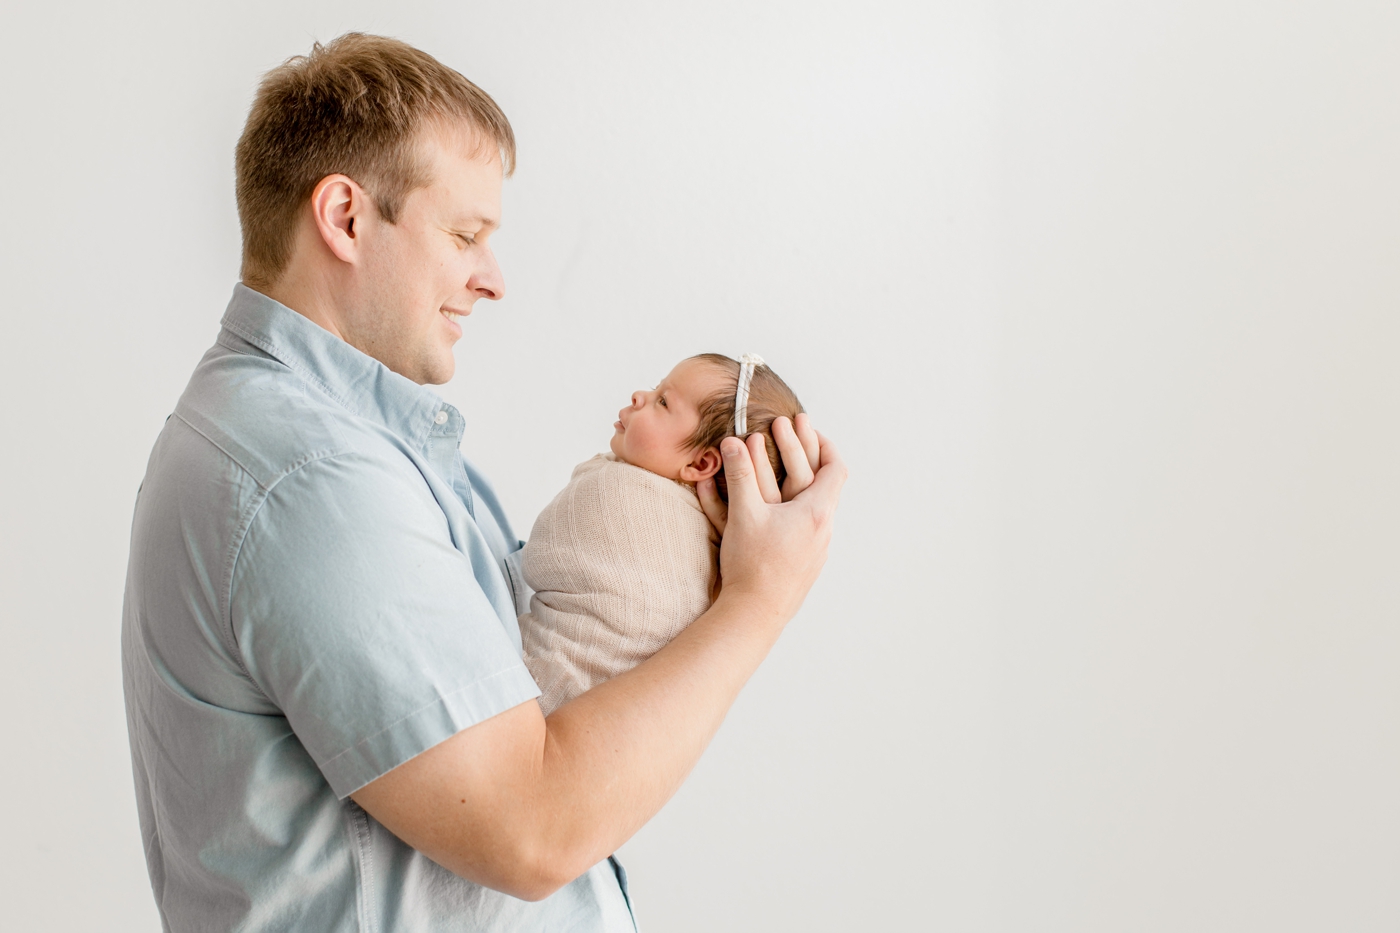 Dad holding baby as they look at each other during newborn session. Photo by Sana Ahmed Photography.